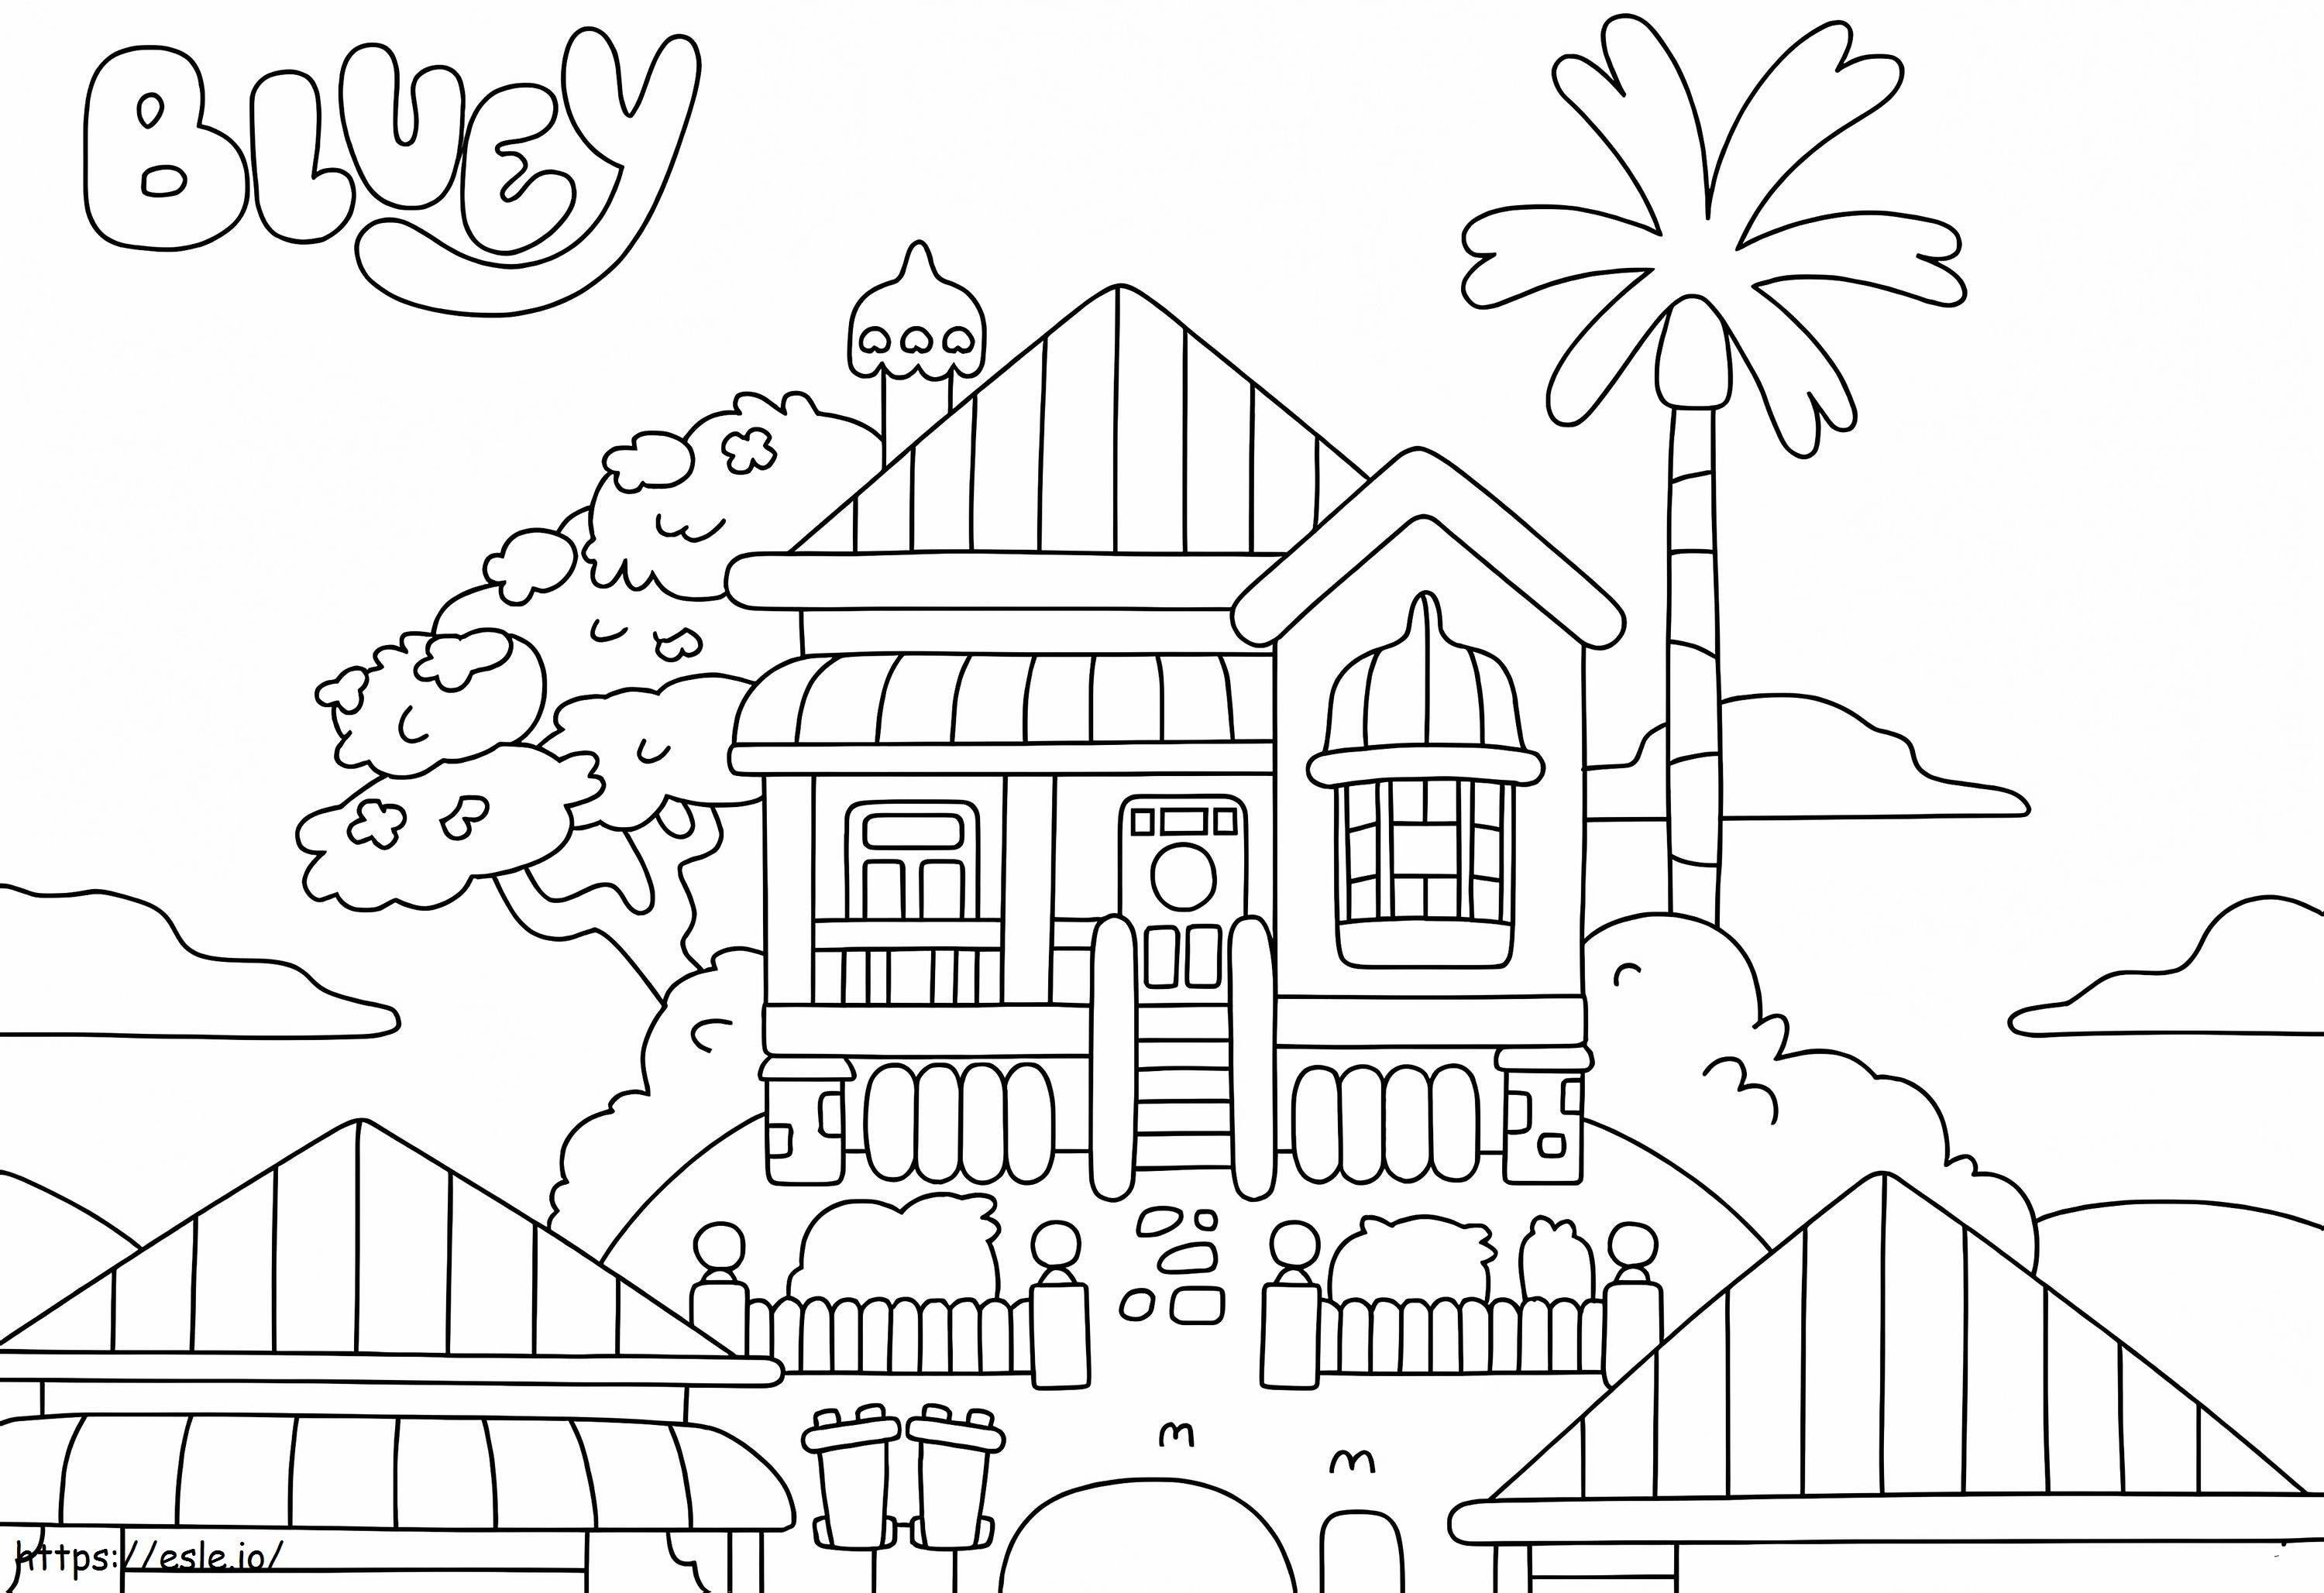 1591580538 1582826877House coloring page